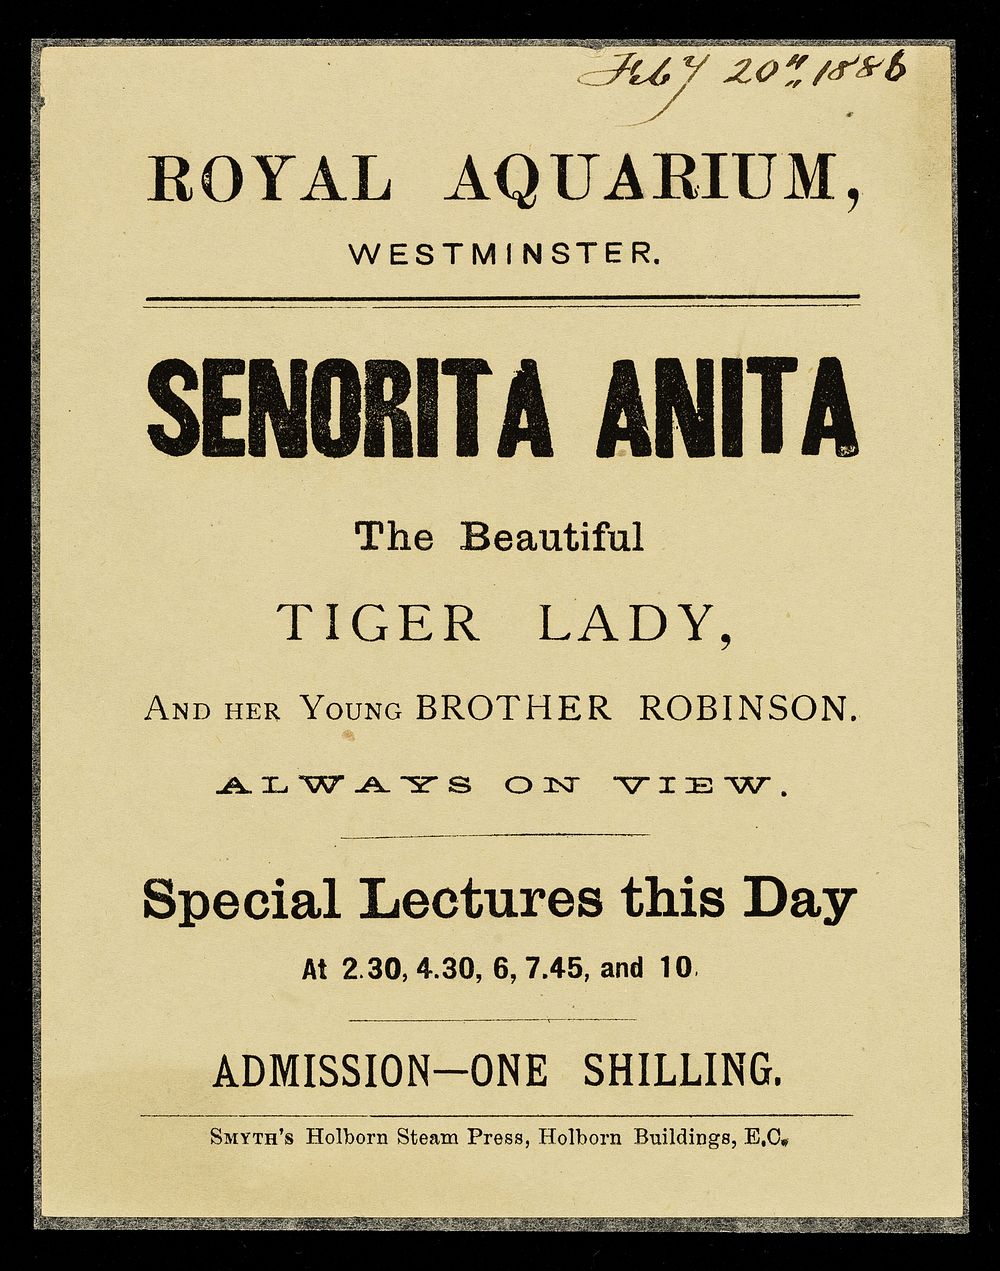 [Leaflet advertising appearances by Senorita Anita (The Tiger Lady) and her brother, Robinson (The Bear Boy) at the Royal…